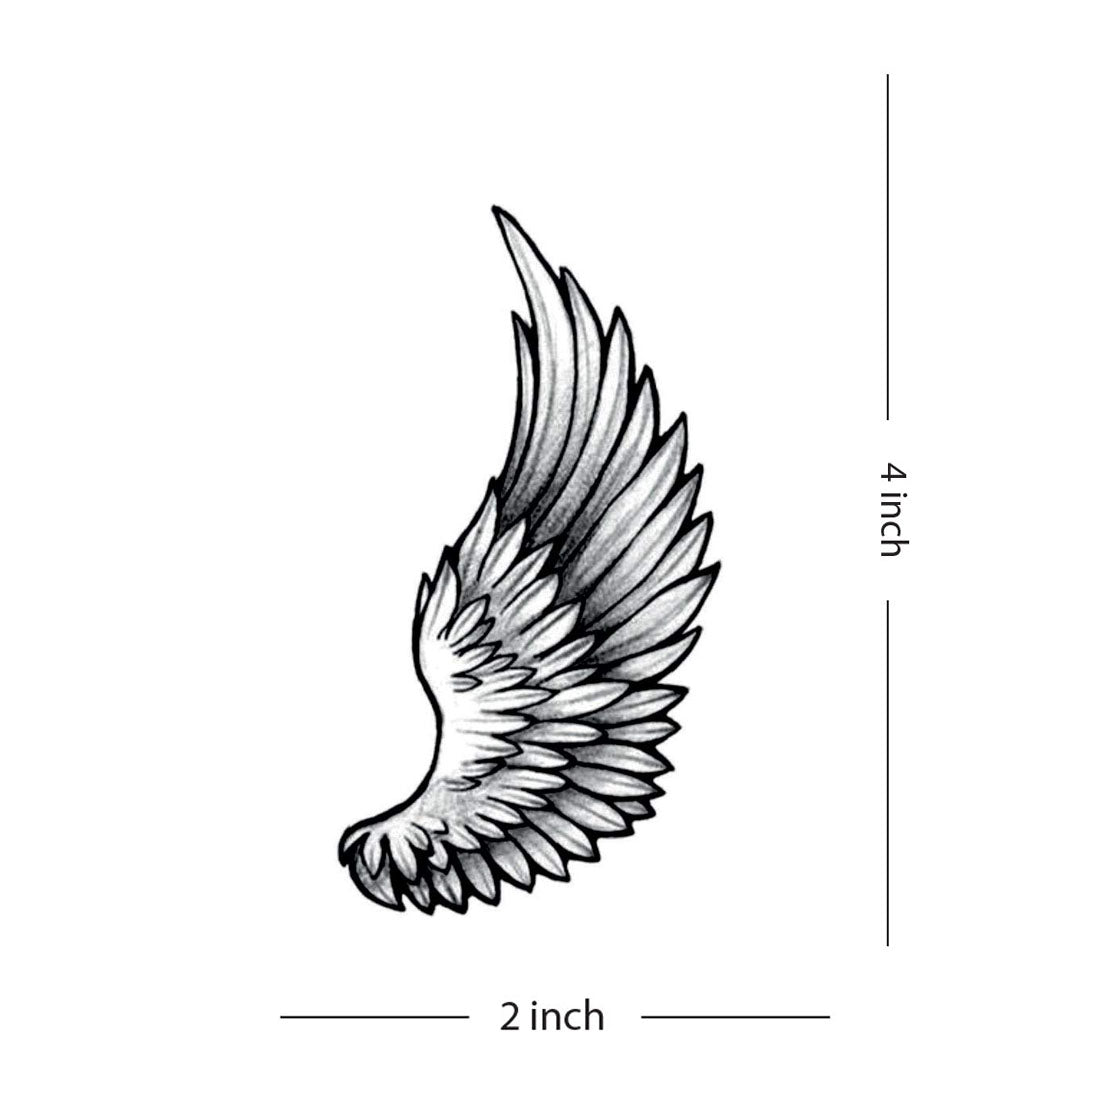 Amazon.com : Angel Wings Temporary Tattoos Waterproof Tattoo Fake For Men  Women Design Decorations Body Neck Chest Shoulder Legs Arm Back Stickers  Removable Cartoon Painting 3D Tattoo, Mix Color, 8X4 INCH. :